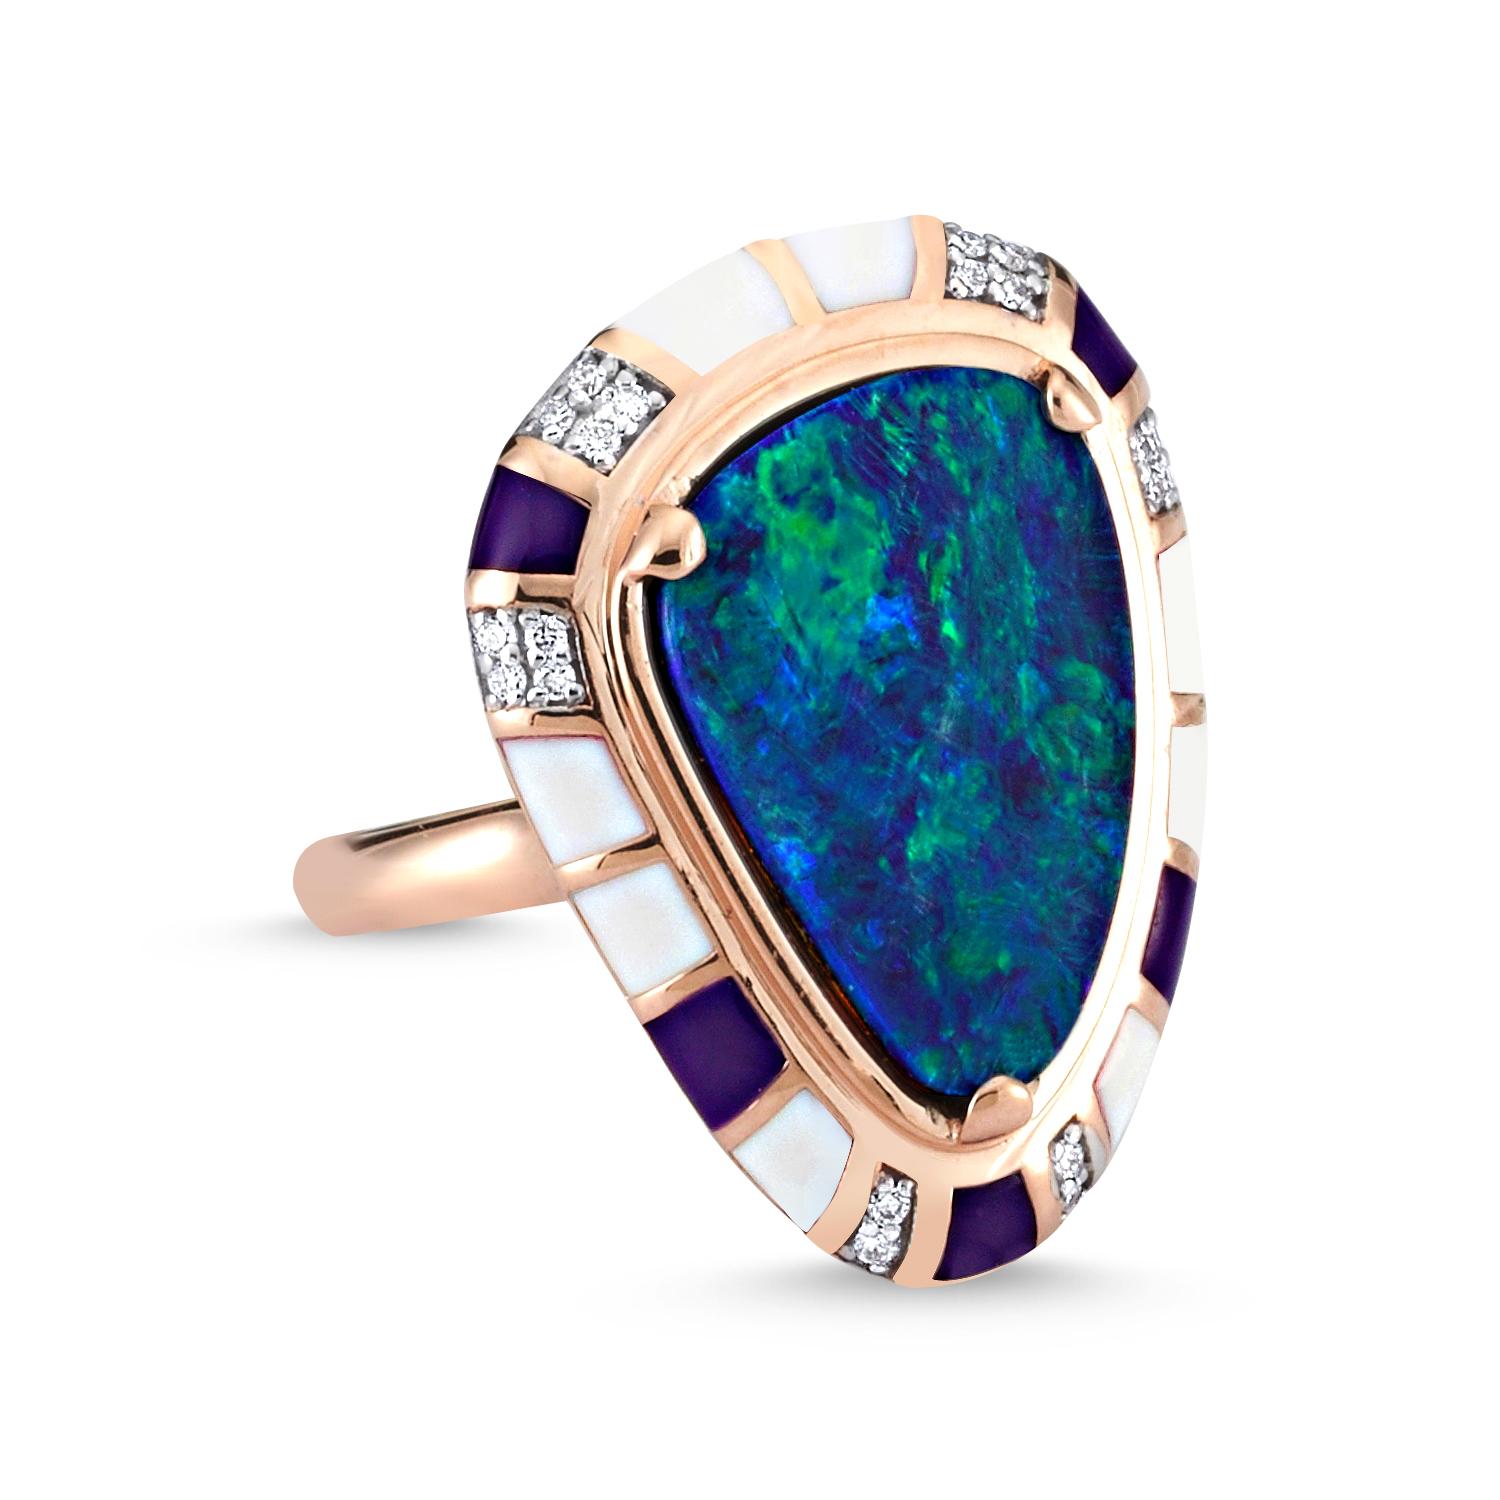 The Treasures of The Sea Collection is inspired by the water element which represents the treasures and natural stones hidden in the depths of the sea.

Belize ring in 14k Rose gold with diamond and blue opal by Selda Jewellery

Additional